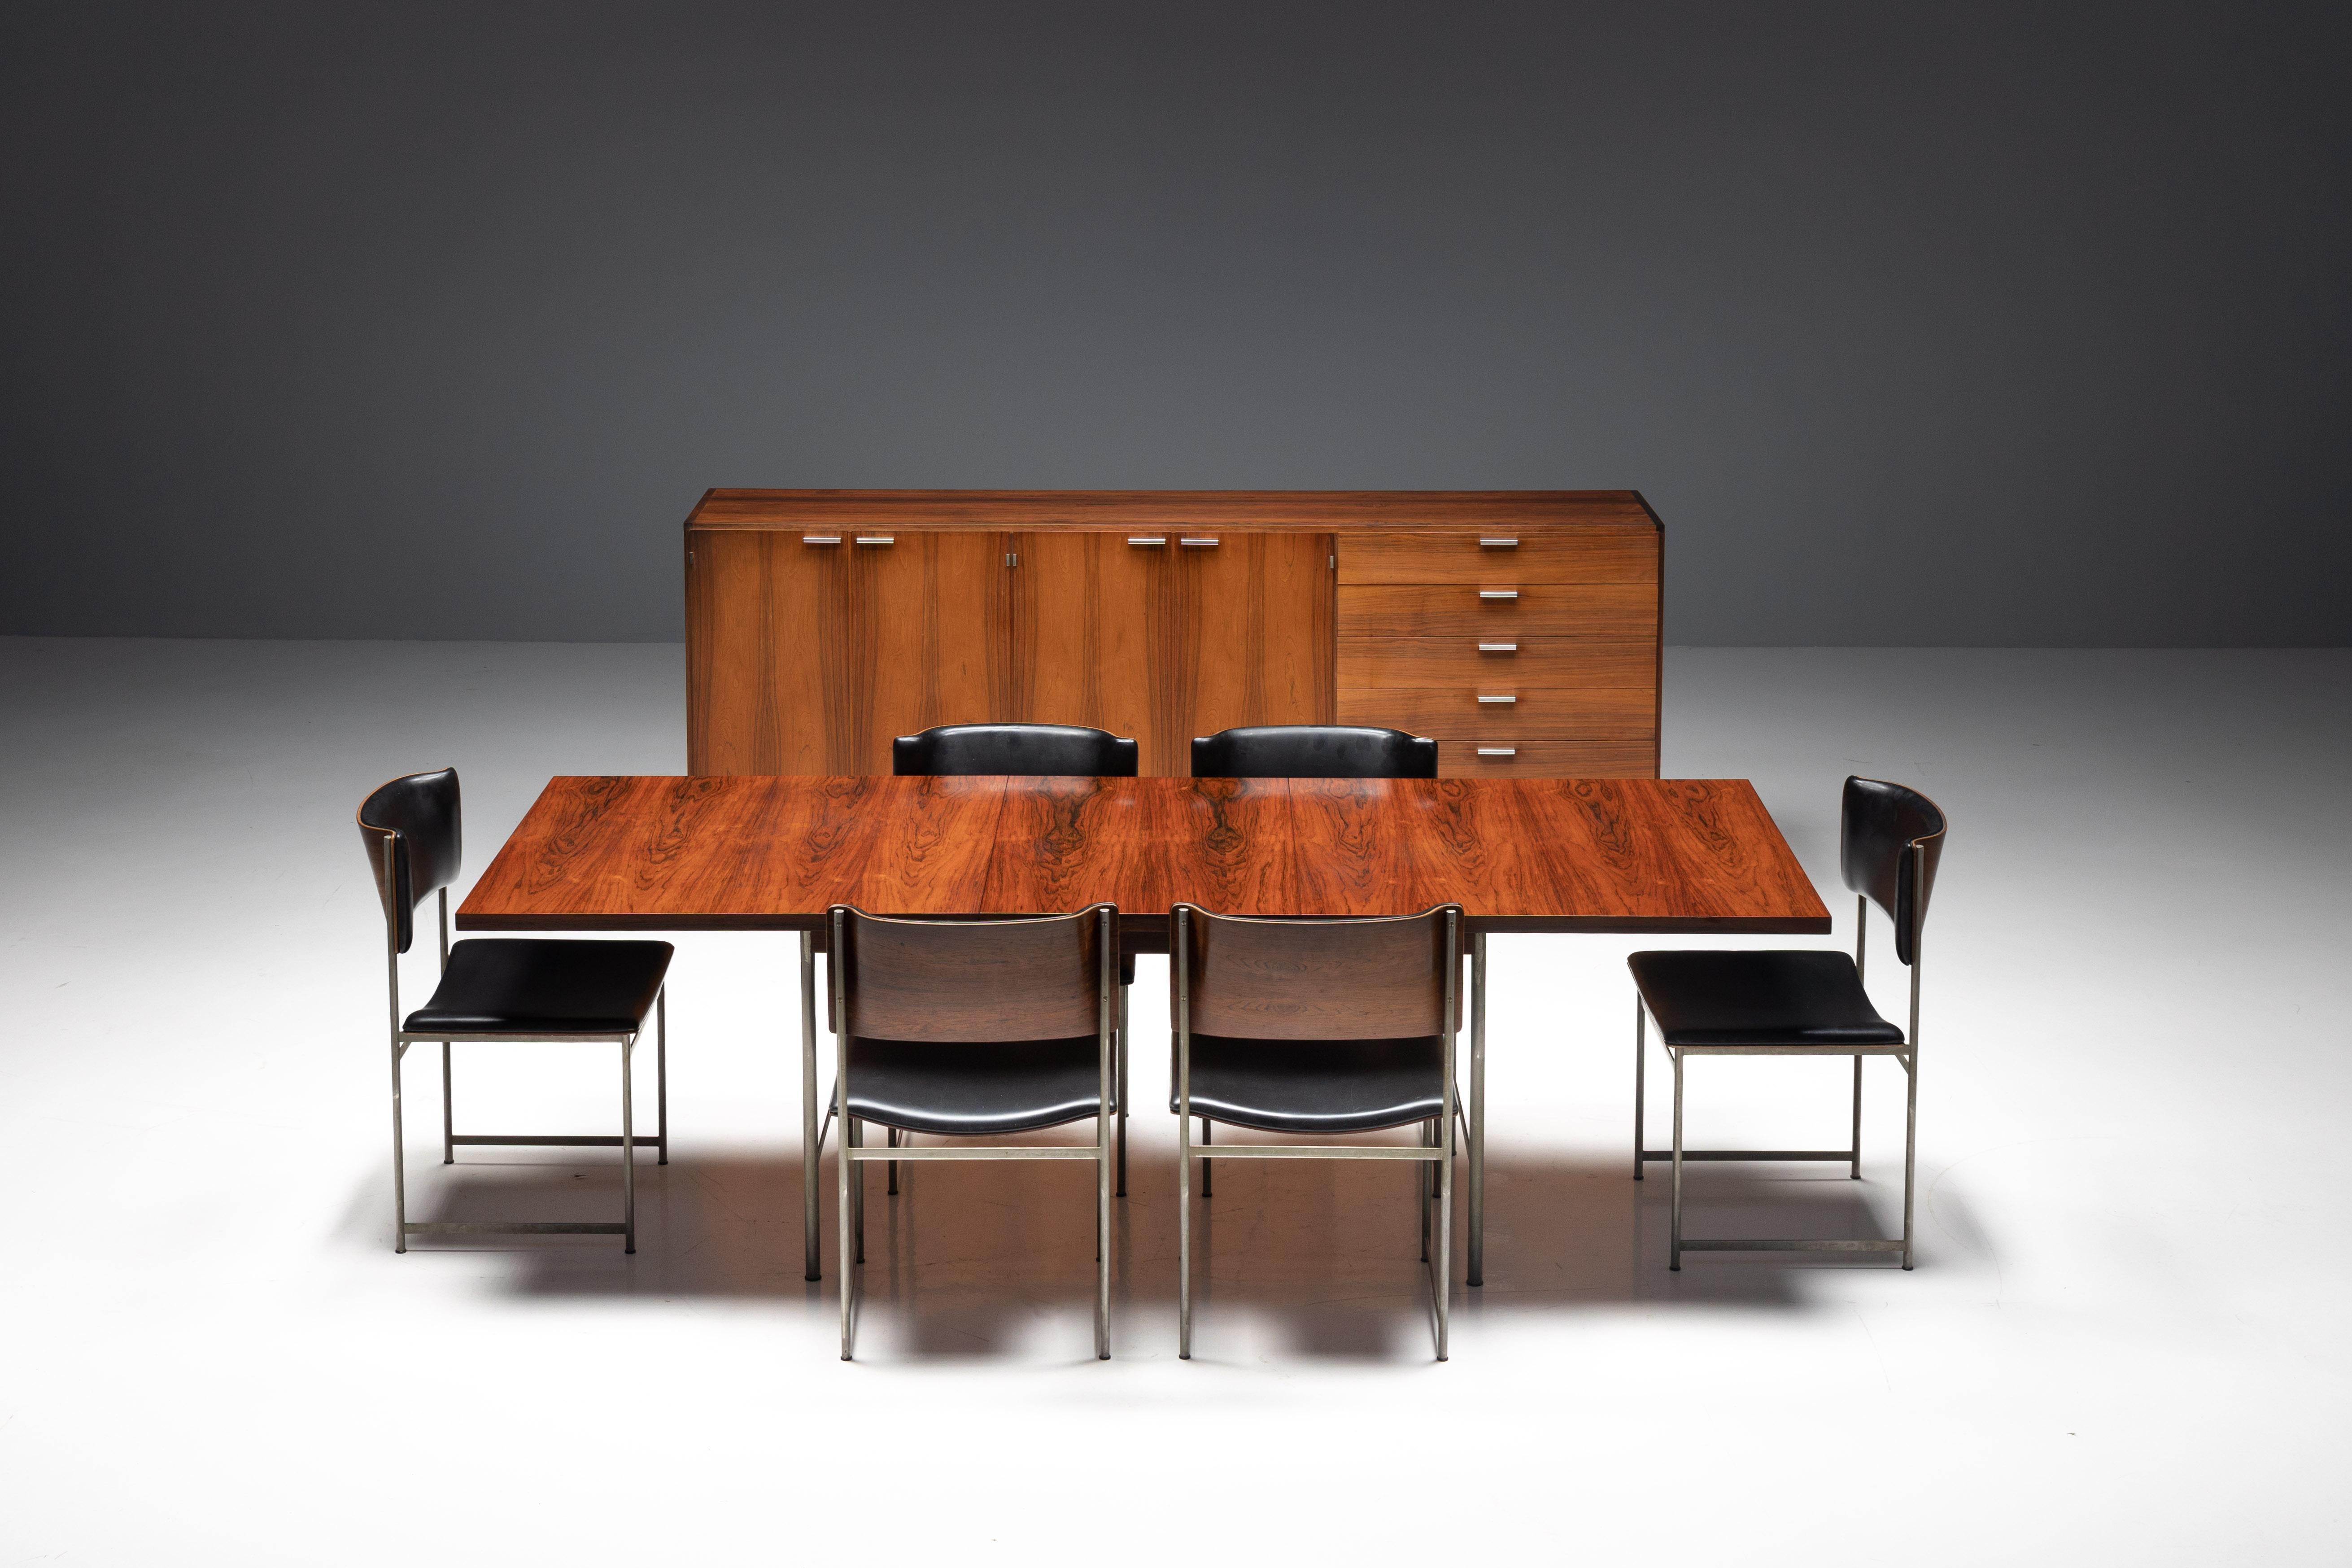 SM08 dining room set by Cees Braakman for Pastoe, crafted in the Netherlands during the 1960s. This iconic set comprises the SM08 dining table and six matching dining chairs, promising to elevate your dining space to new heights. The extendable